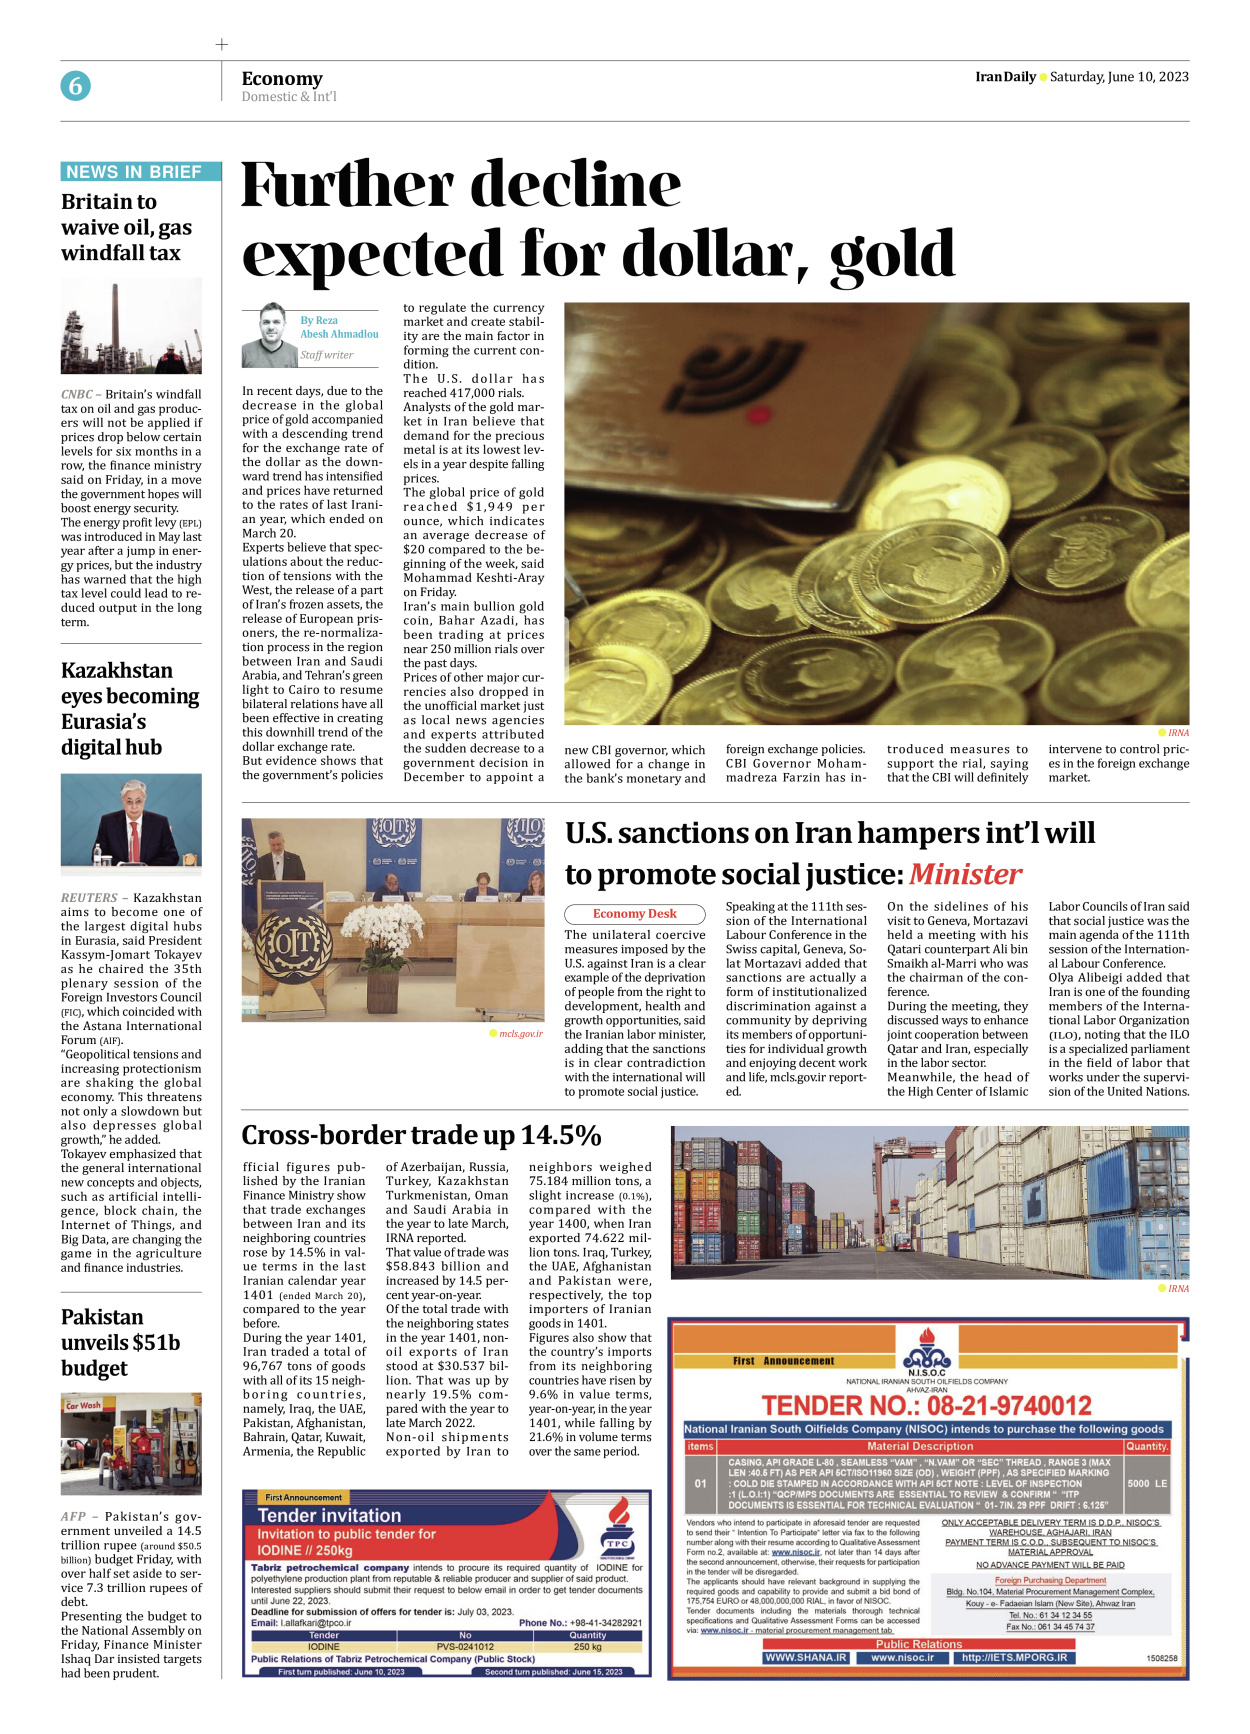 Iran Daily - Number Seven Thousand Three Hundred and Ten - 10 June 2023 - Page 6